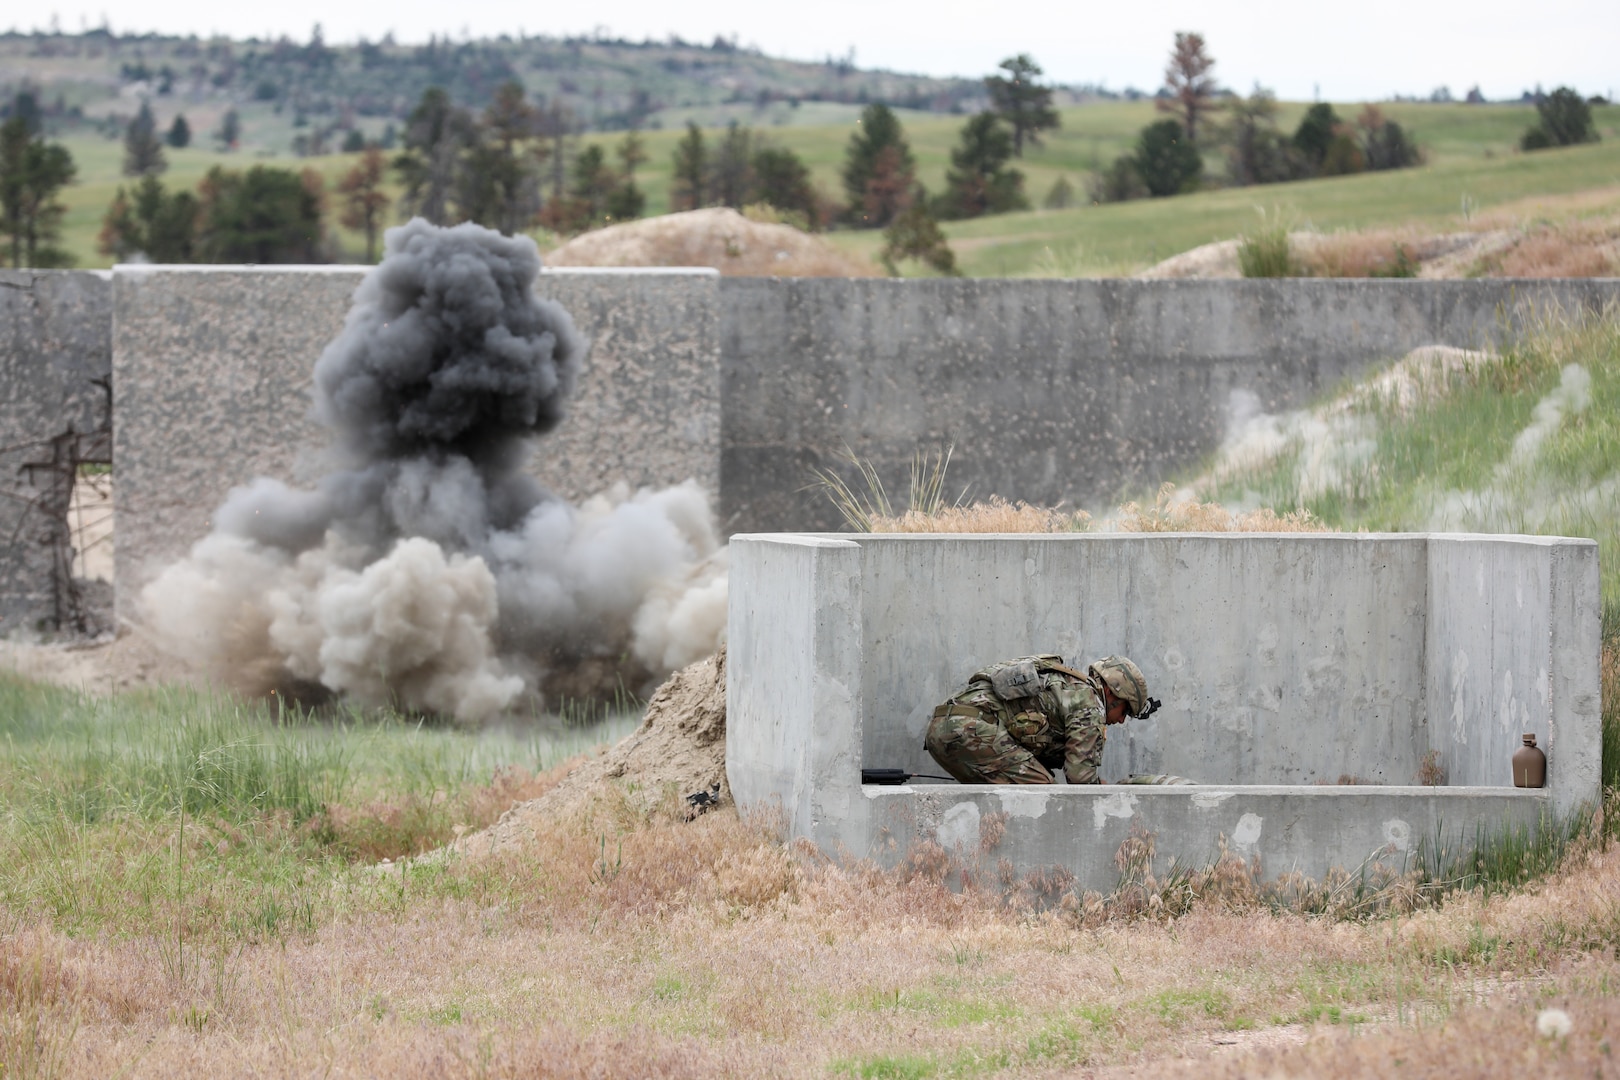 Soldiers with the 211th Engineer Company train on the grenade range during the Golden Coyote exercise in Guernsey, Wyo, June 19, 2021.